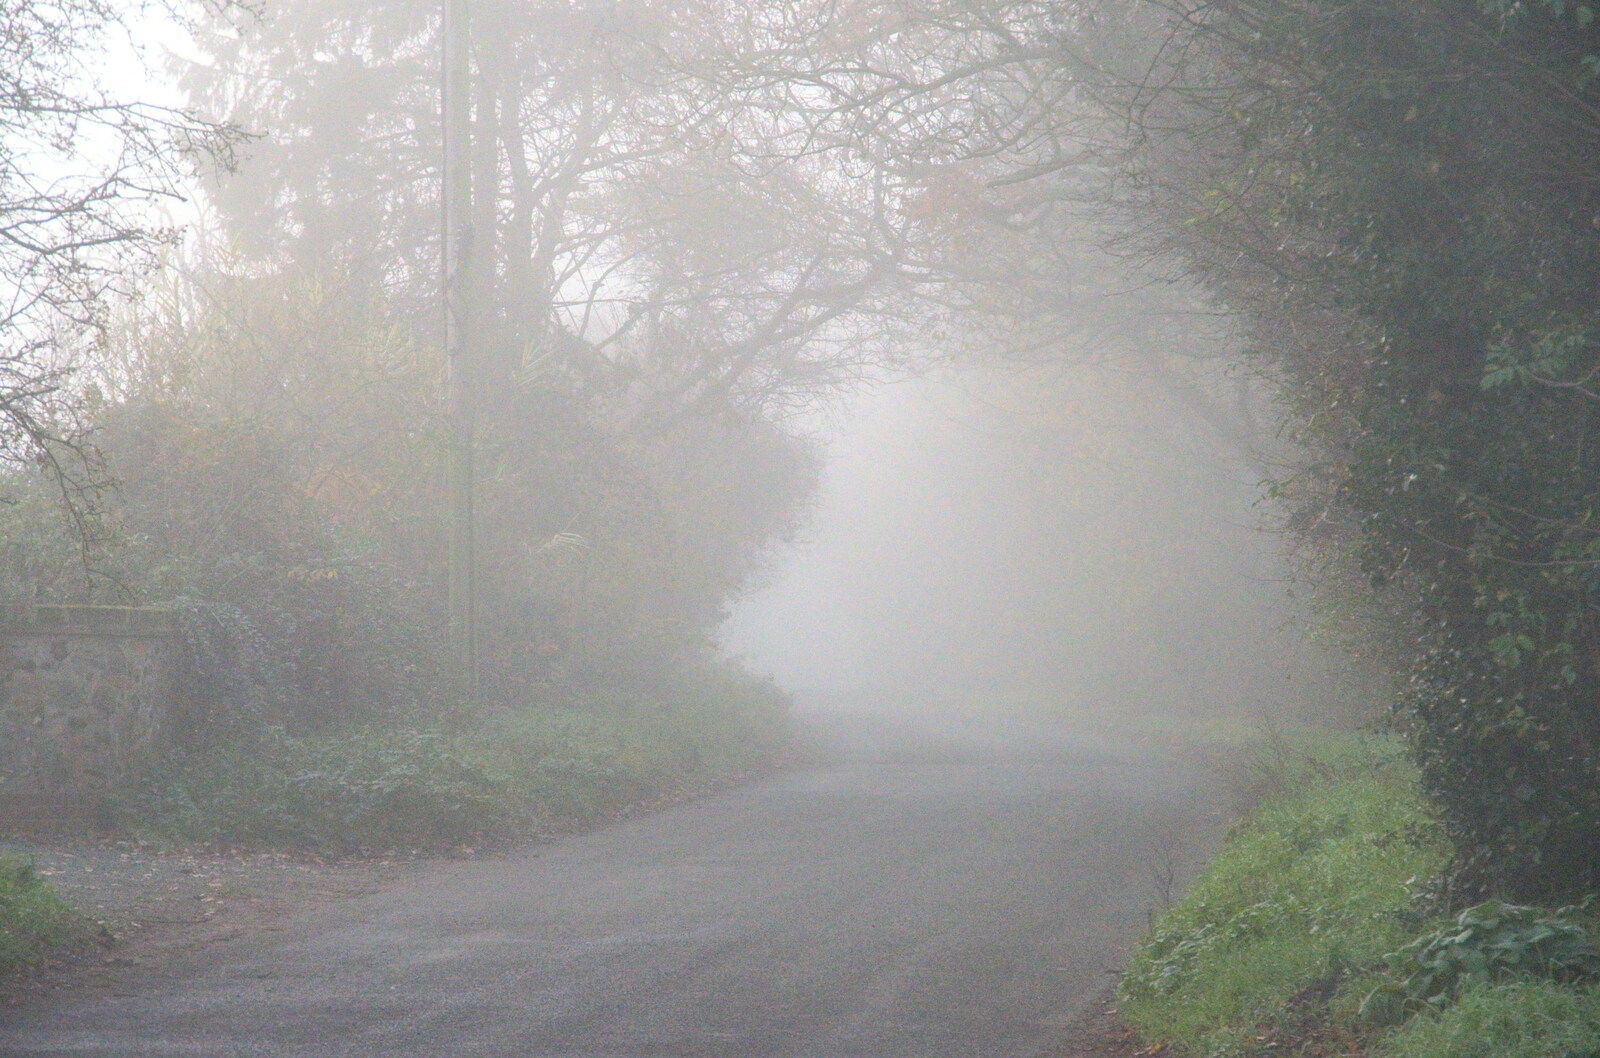 The misty road to Eye from A Return to the Oaksmere, Brome, Suffolk - 8th December 2020